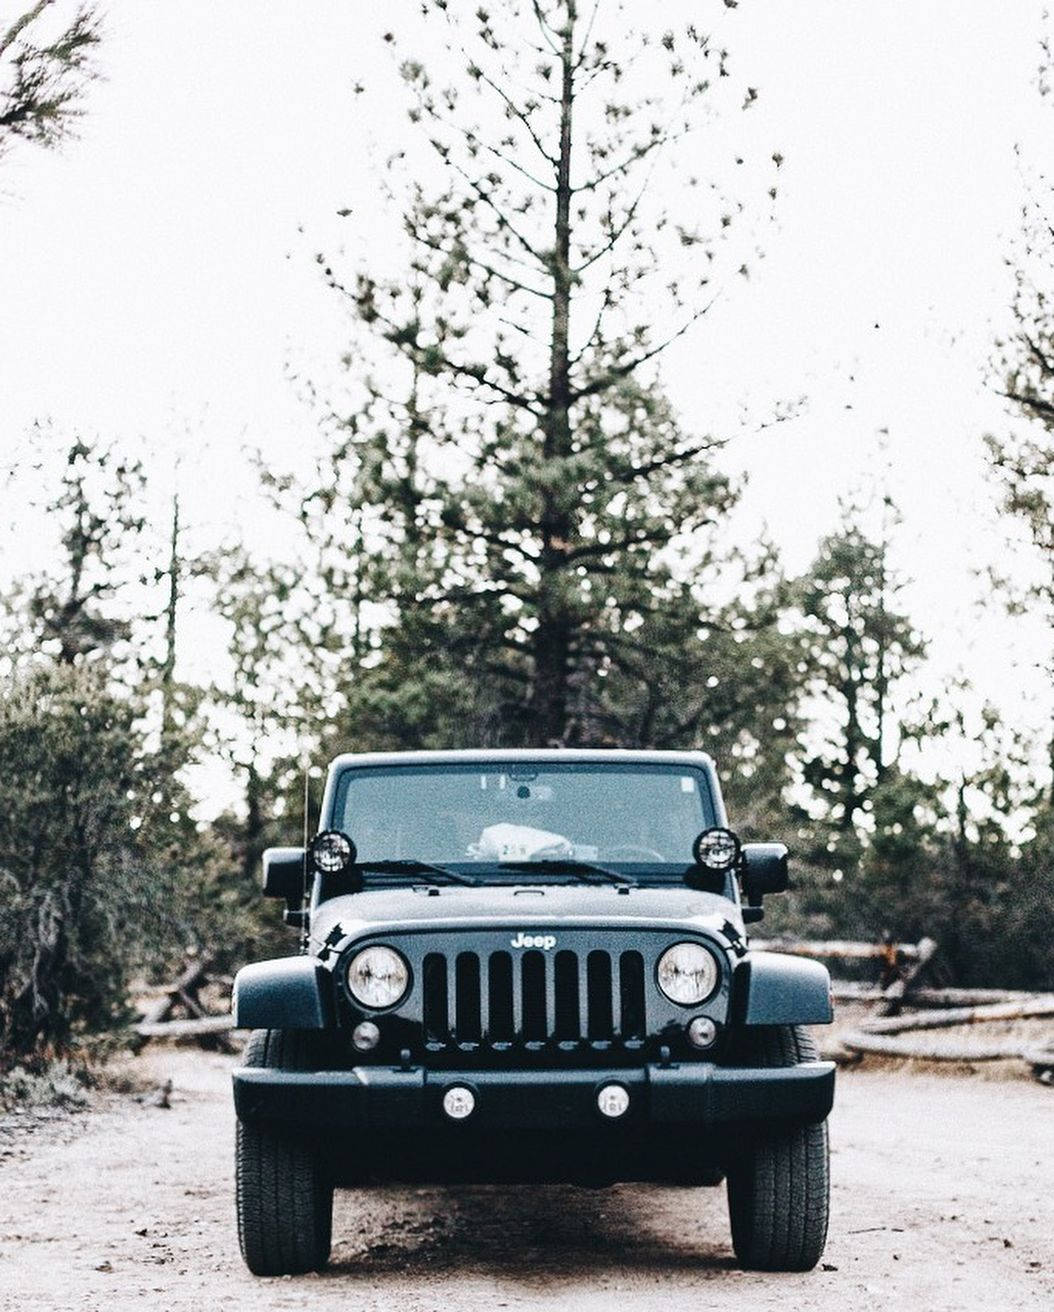 Black Jeep Wrangler With Tall Trees Wallpaper